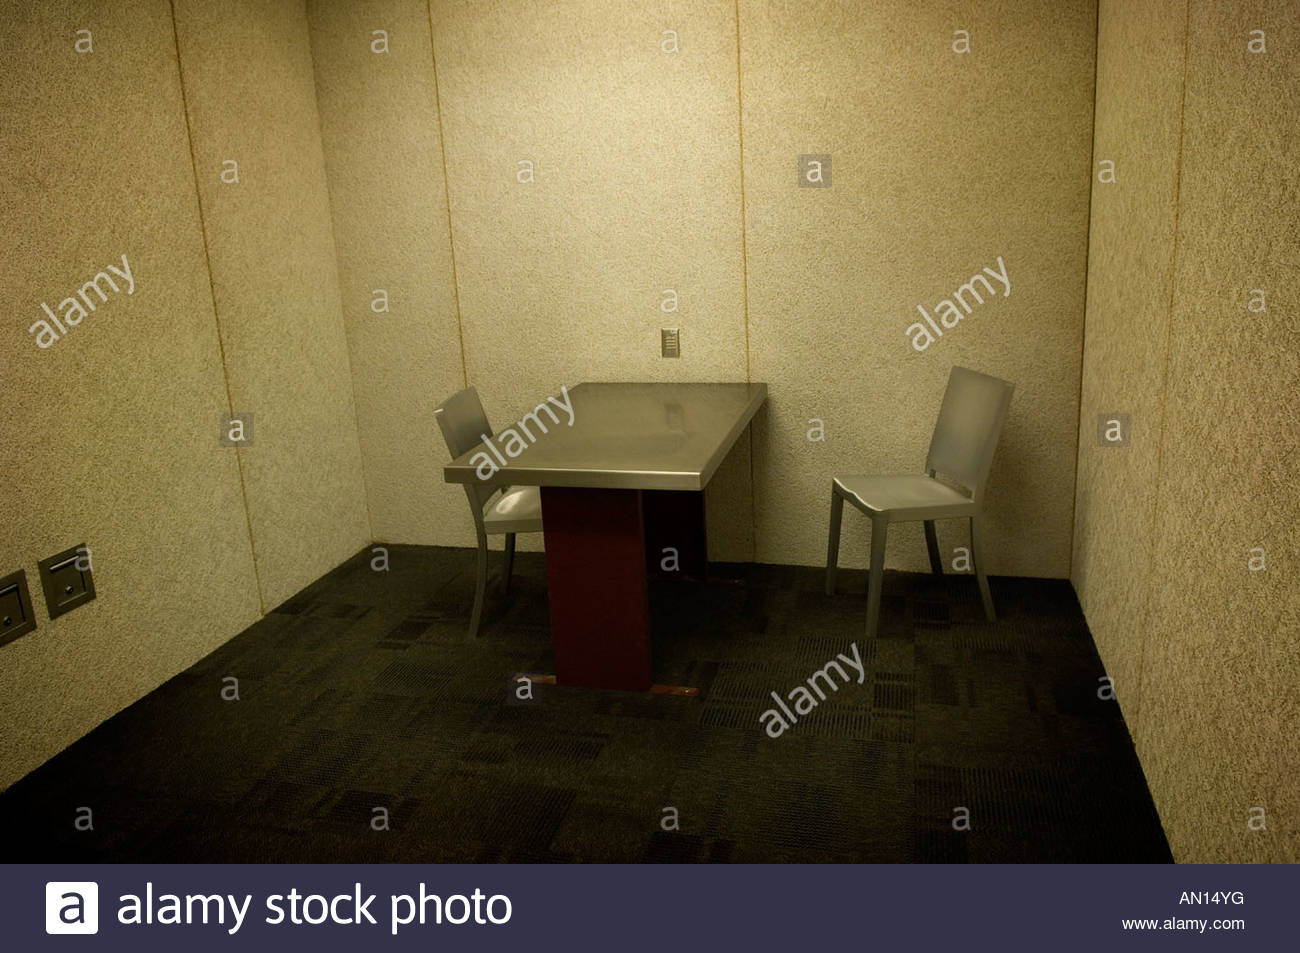 Police Room Stock Photos Police Room Stock Images Alamy